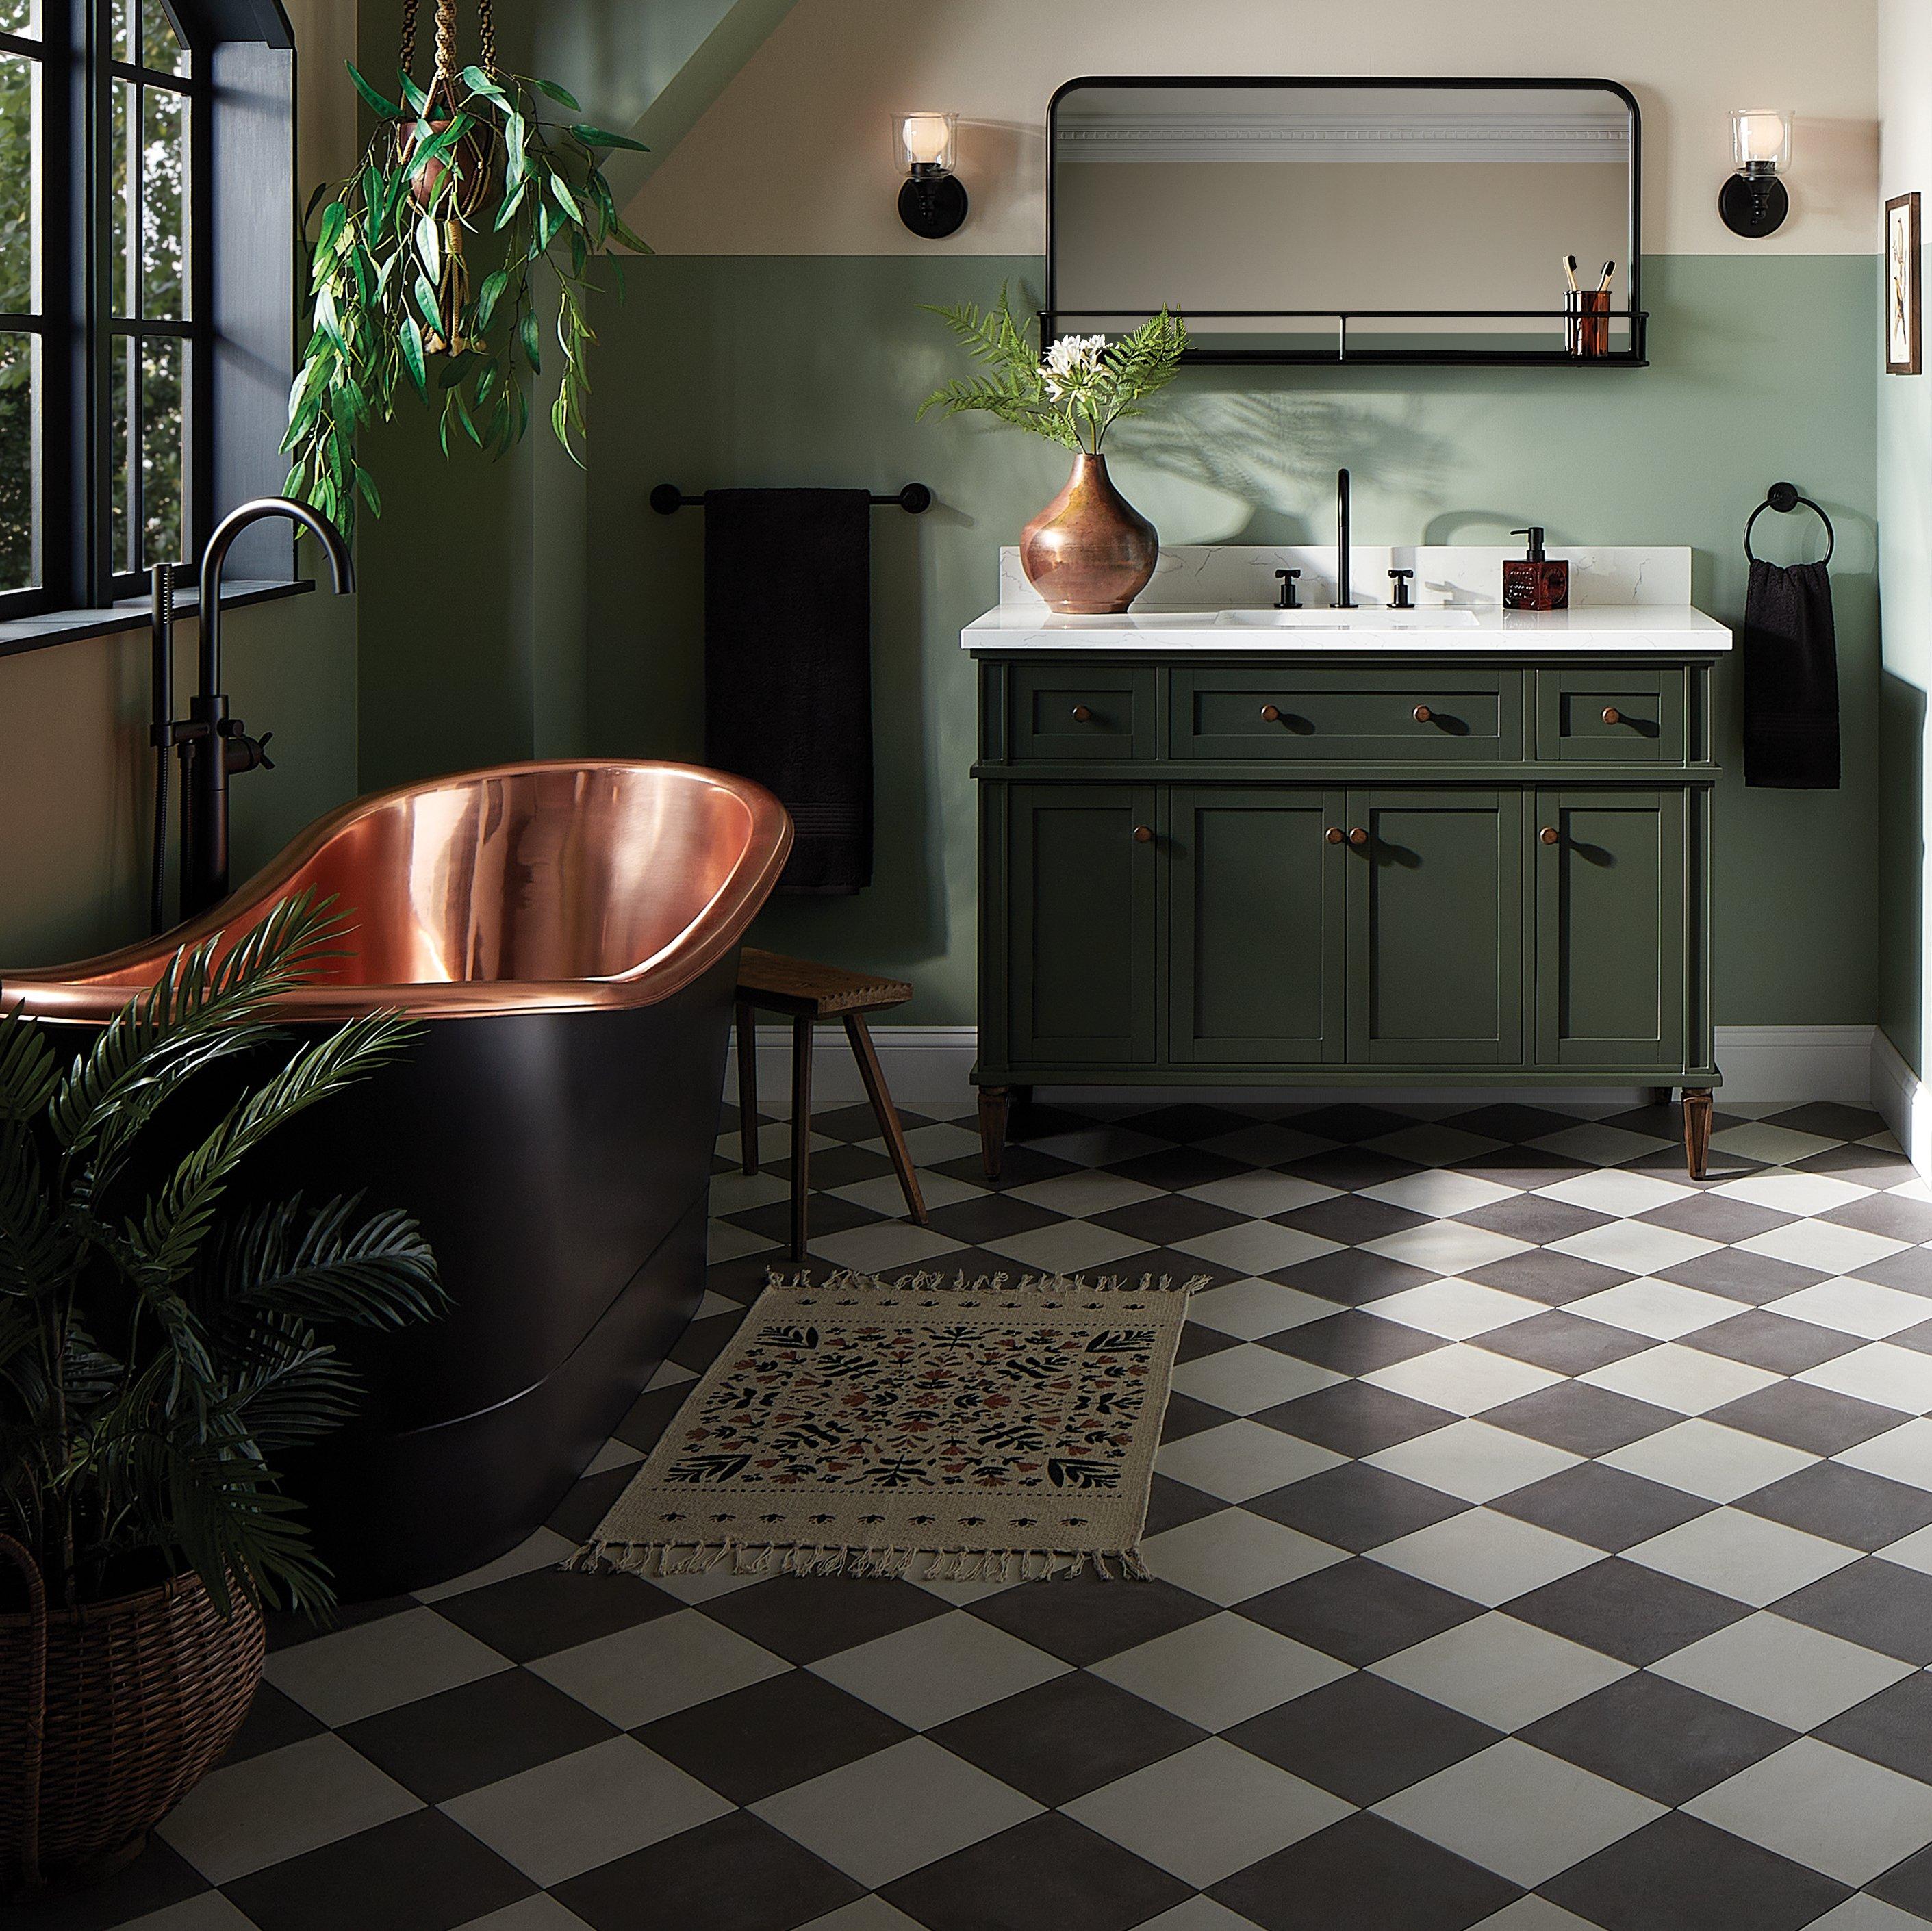 Moody bathroom with the 48" Elmdale in Olive Green, 70" Thaine Black Copper Tub, Vassor Widespread Faucet in Matte Black